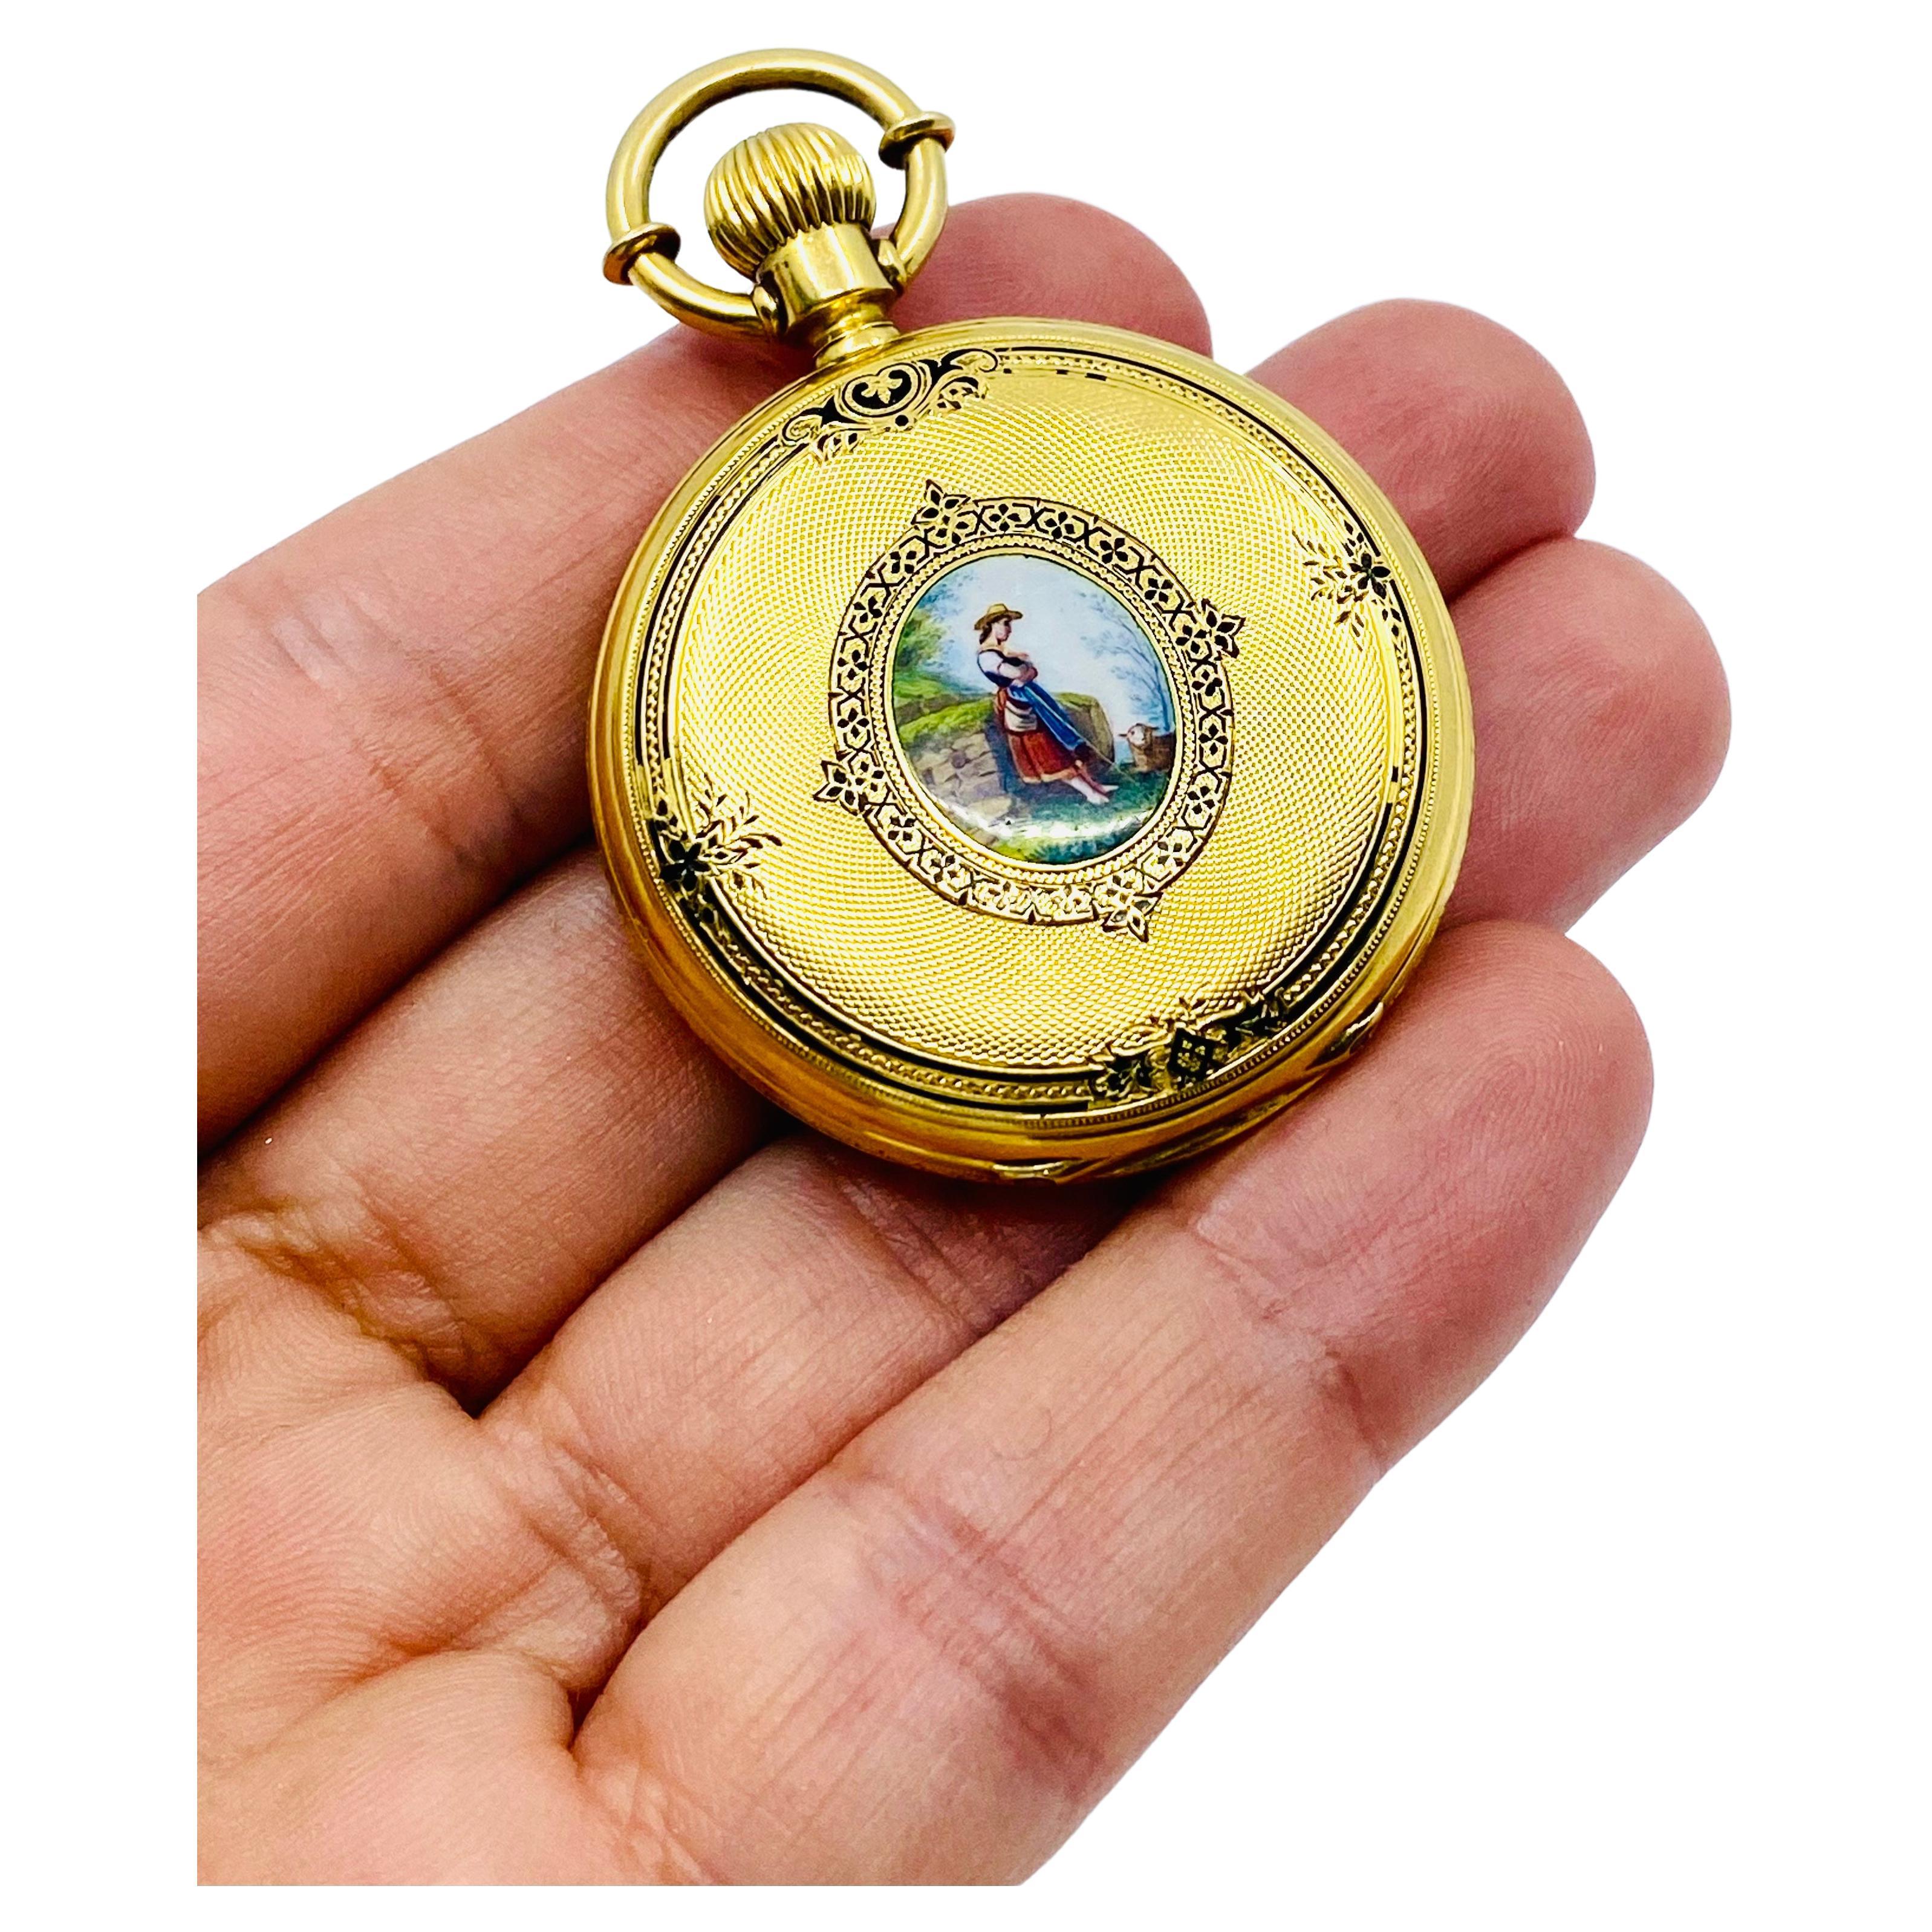 
An amazing Breitling Laederich antique pocket watch, circa late 1800s. The watch is made of 18k gold, features enamel.
The watch is cased in a beautiful hunter case decorated with two enamel miniatures. There is also an ornate black enameled